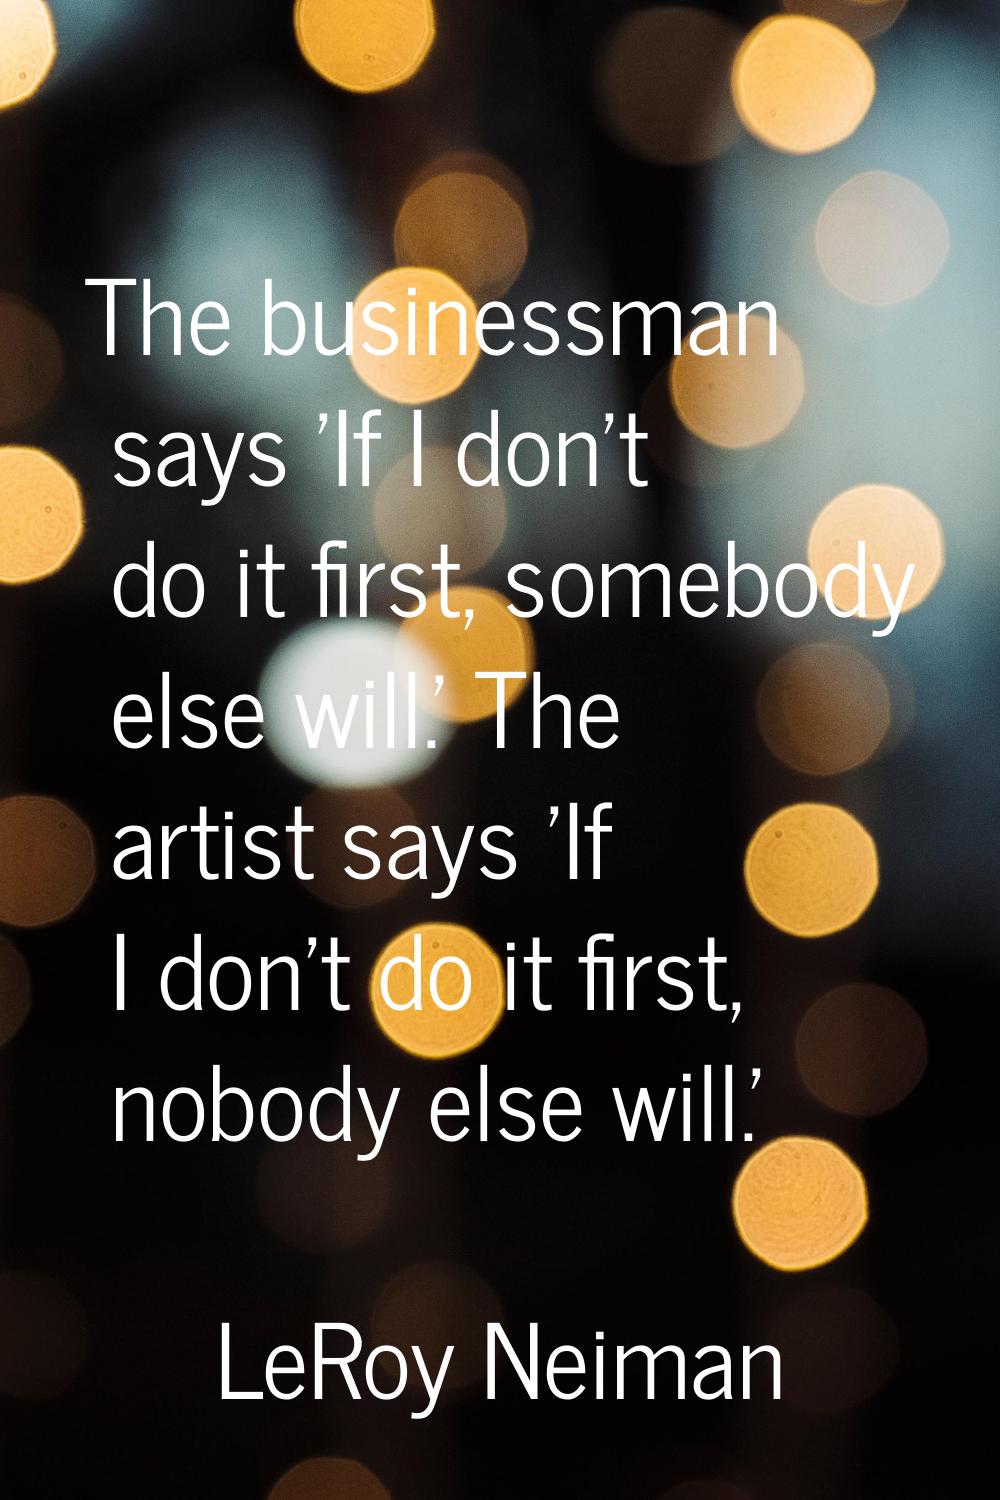 The businessman says 'If I don't do it first, somebody else will.' The artist says 'If I don't do i